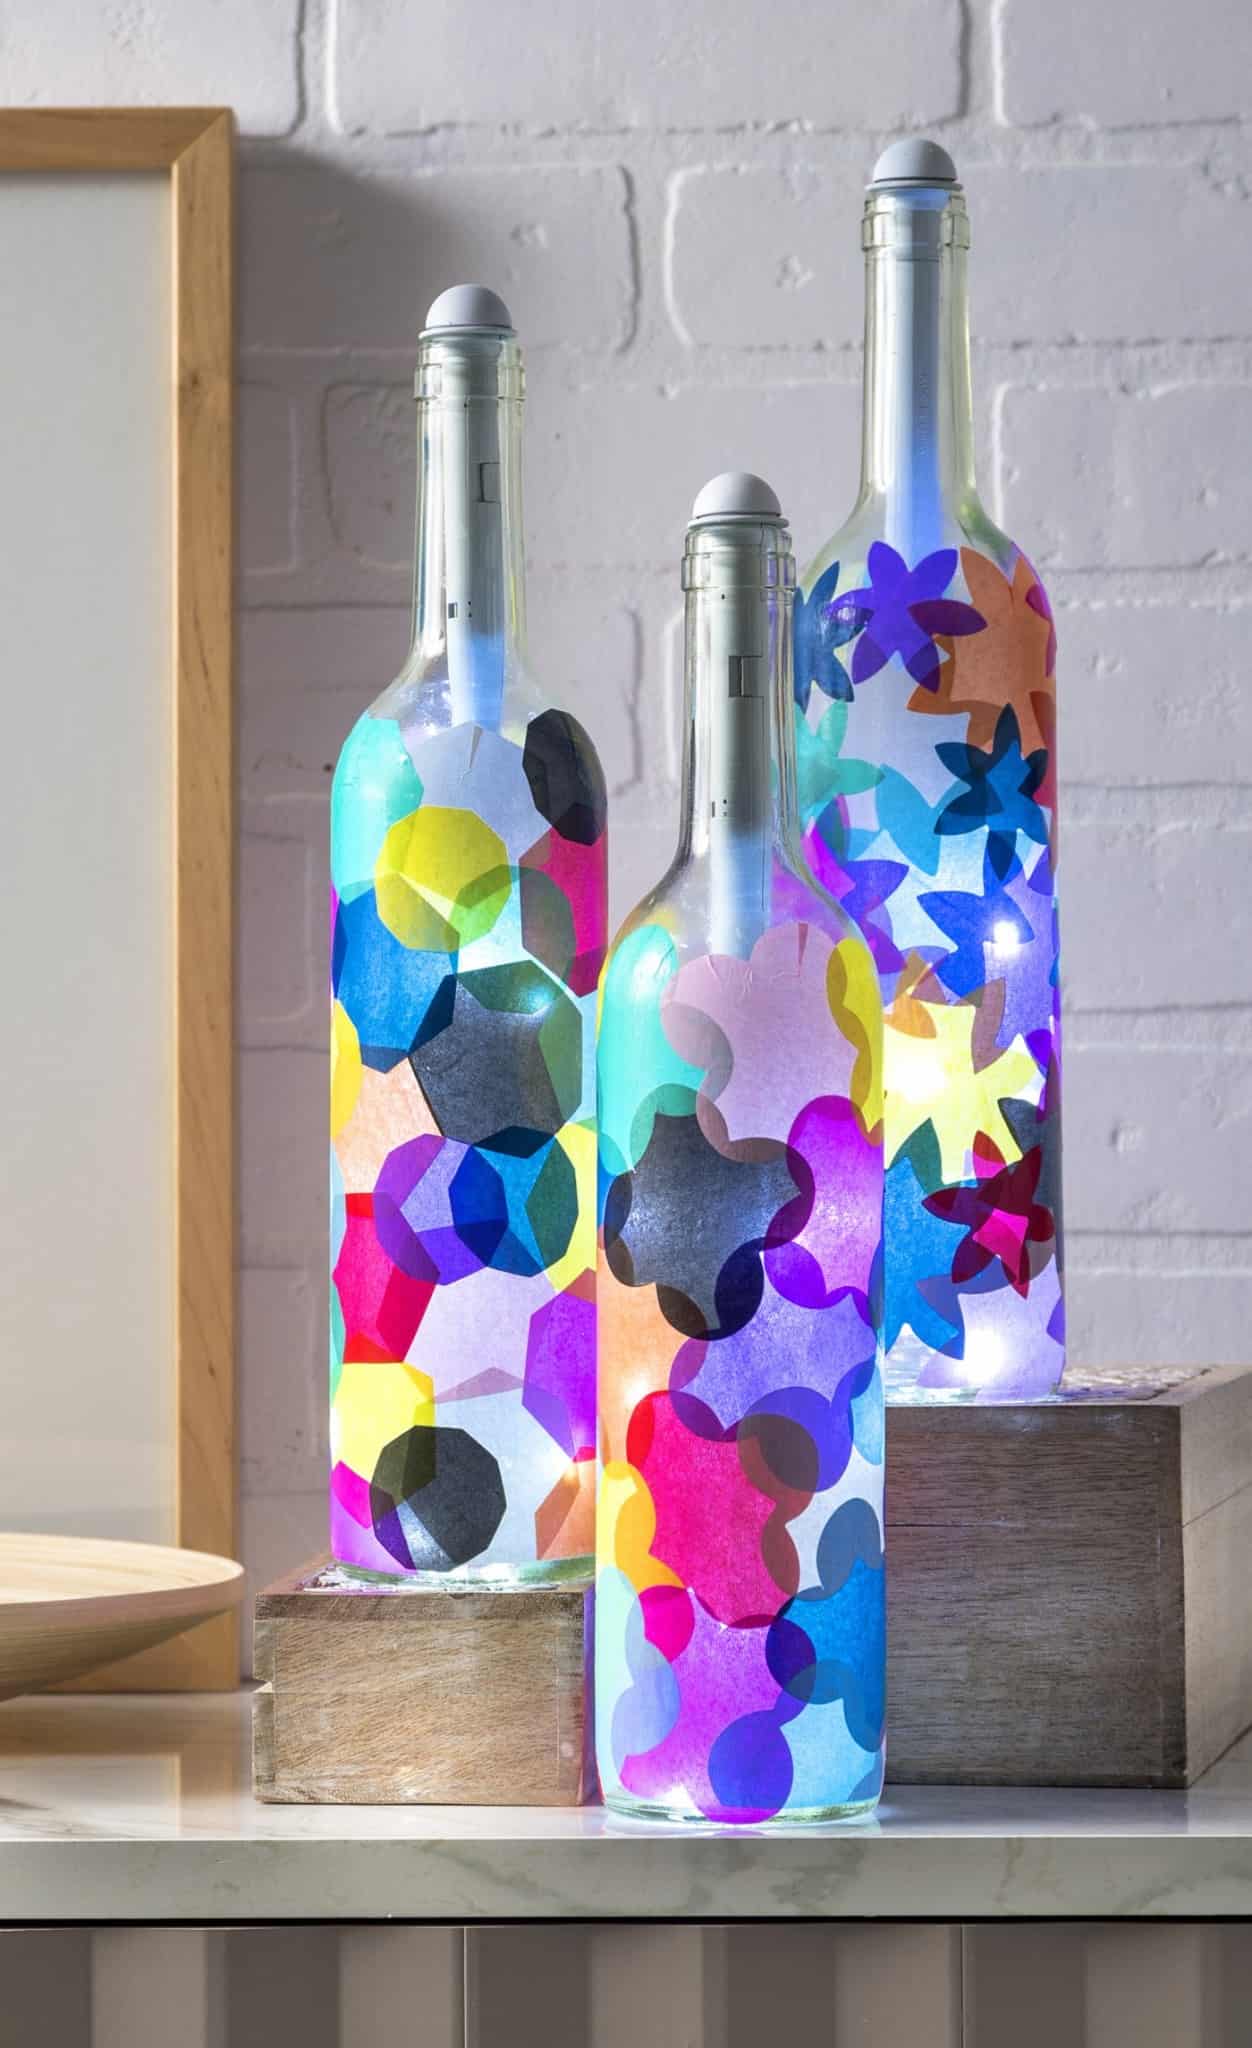 If you love wine bottle crafts, these lanterns are easy to make with tissue paper and Mod Podge. The bottle lights are easy to install and make the project!